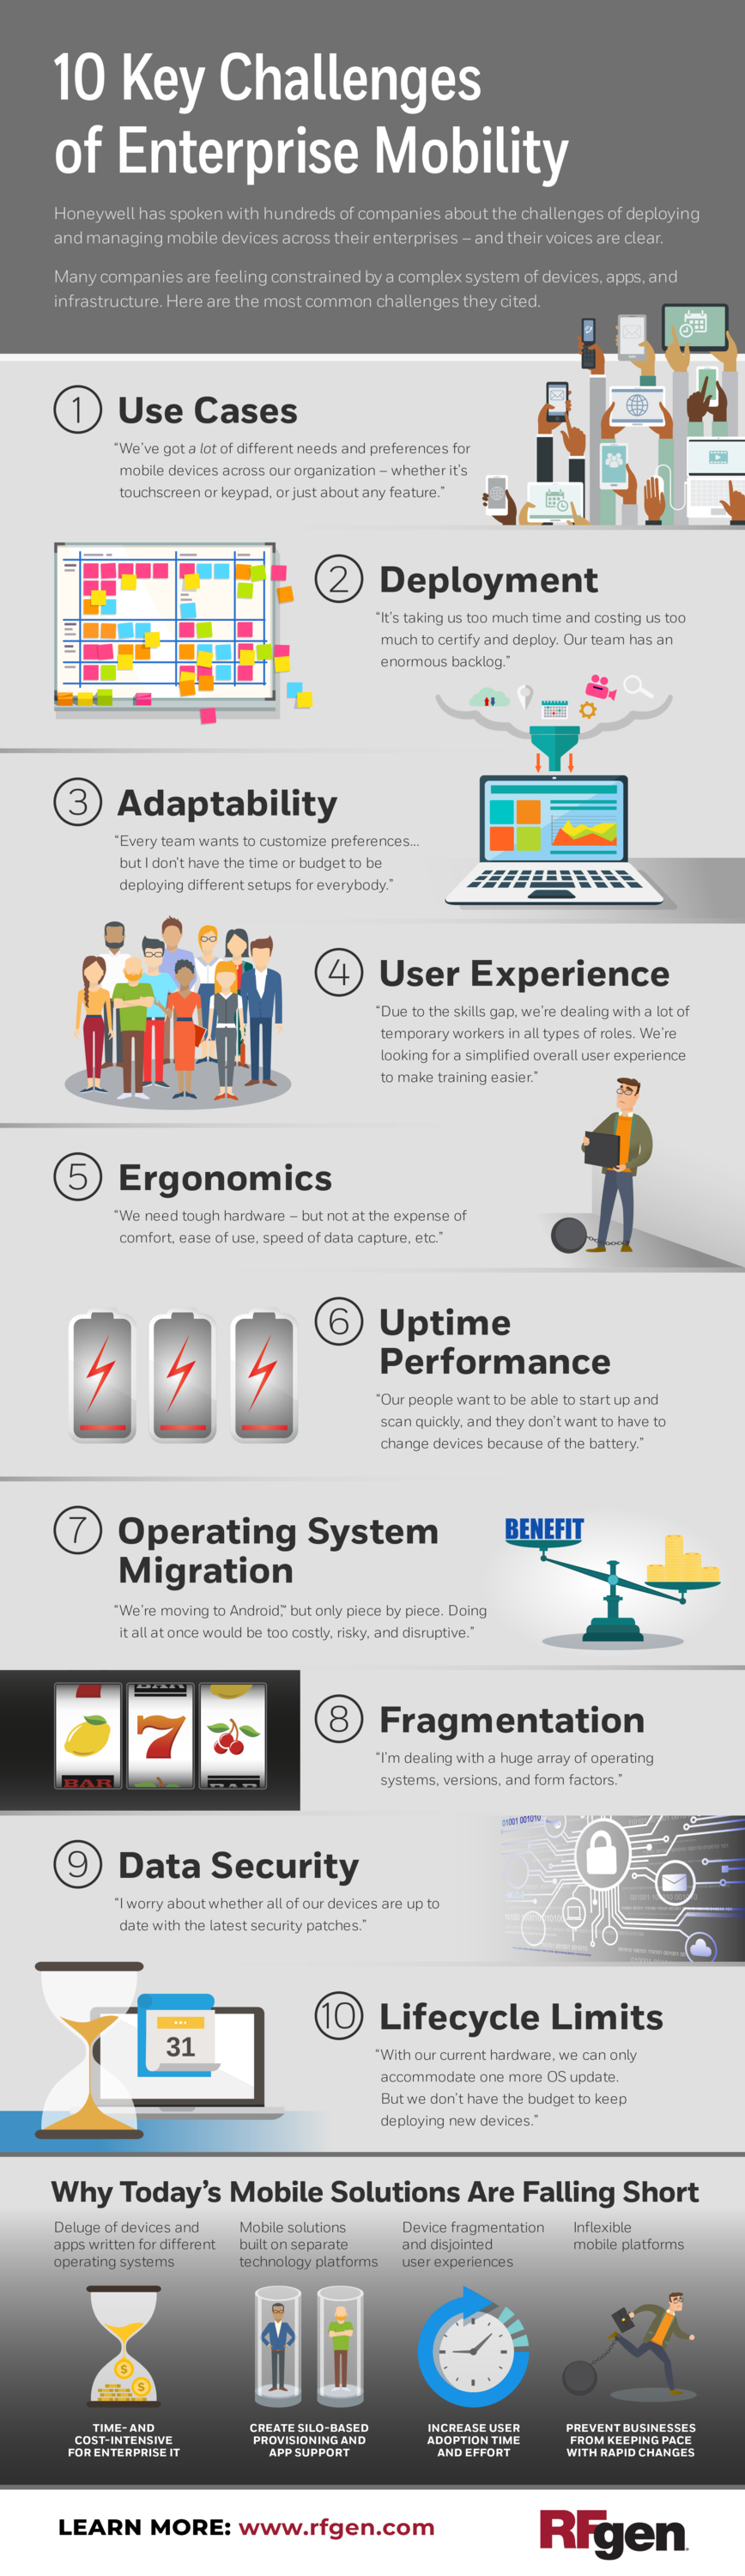 10 Key Challenges of Enterprise Mobility Infographic from Honeywell and RFgen.